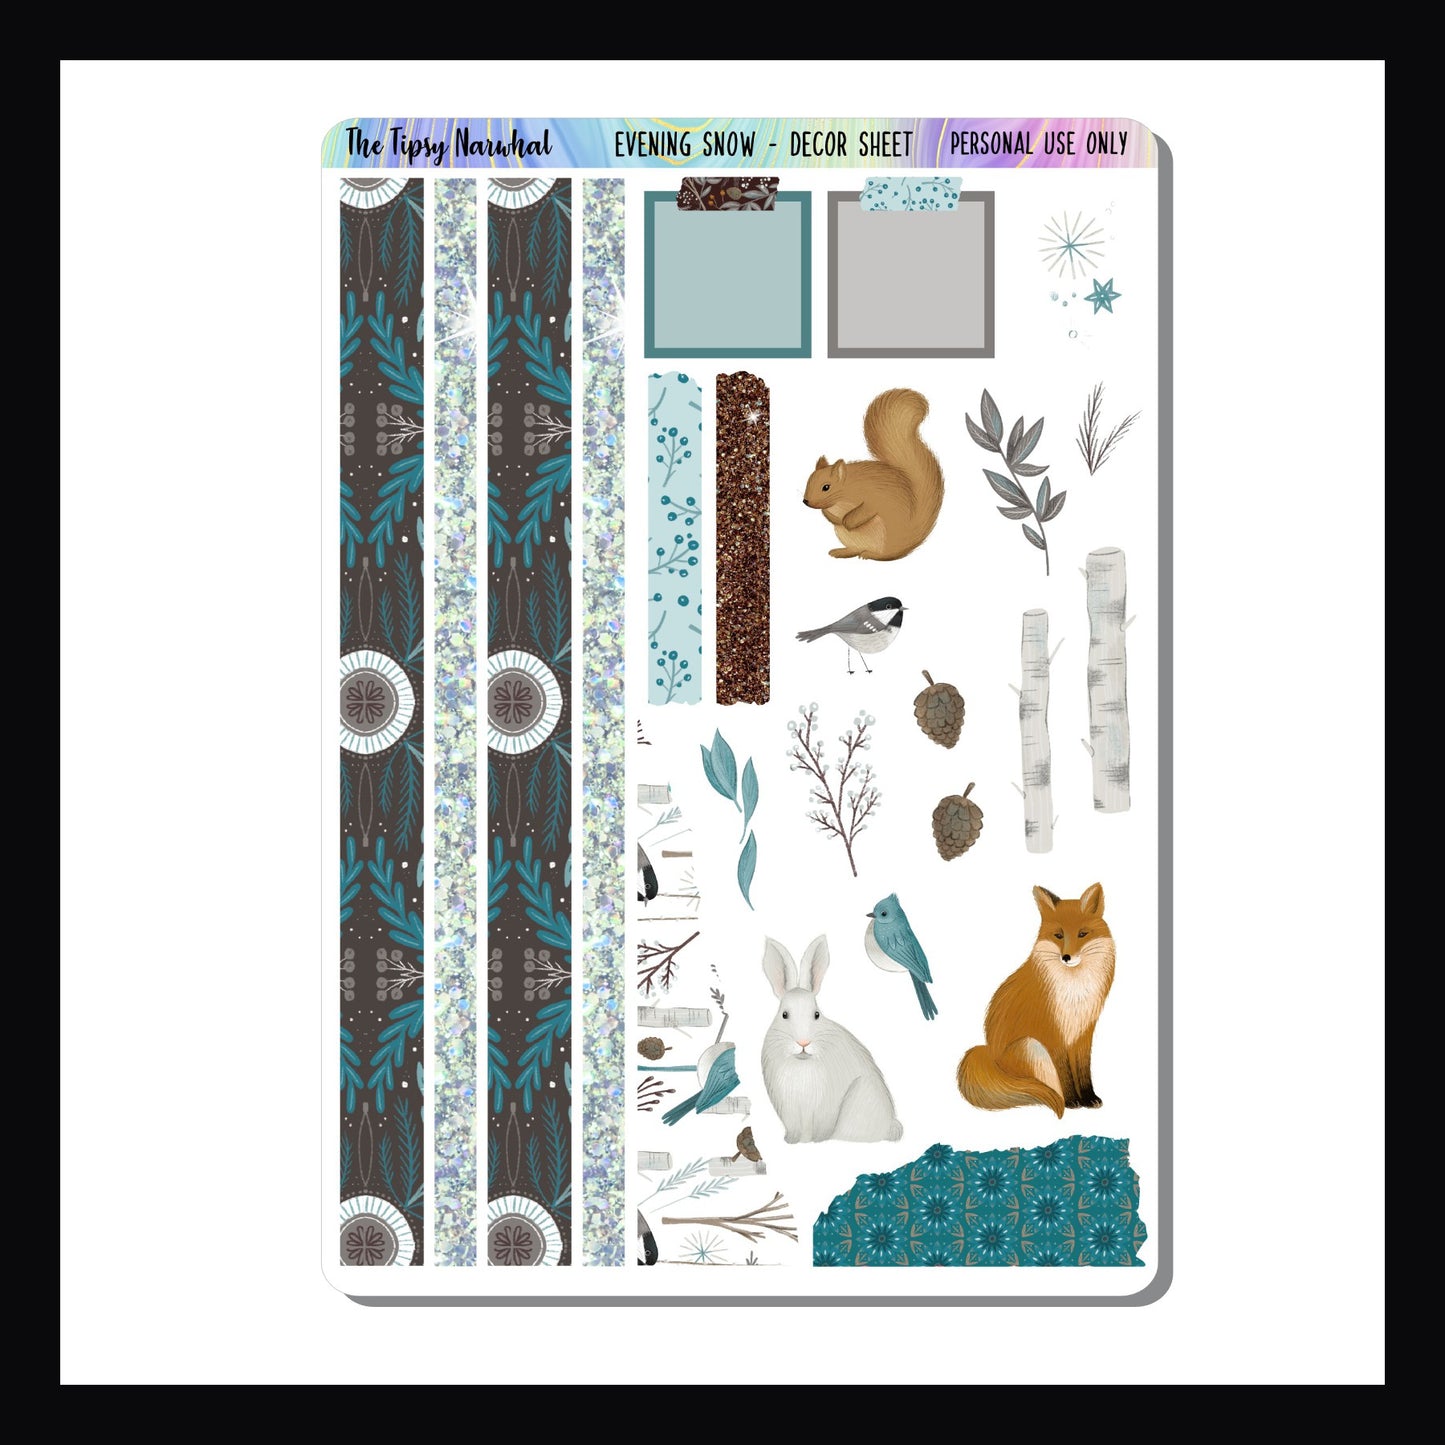 Evening Snow Decor Sheet. Sticker sheet featuring various woodland animals, trees and snowflakes.  Also includes washi strips, sticky note and torn corner stickers. Blue, grey and brown color palette.